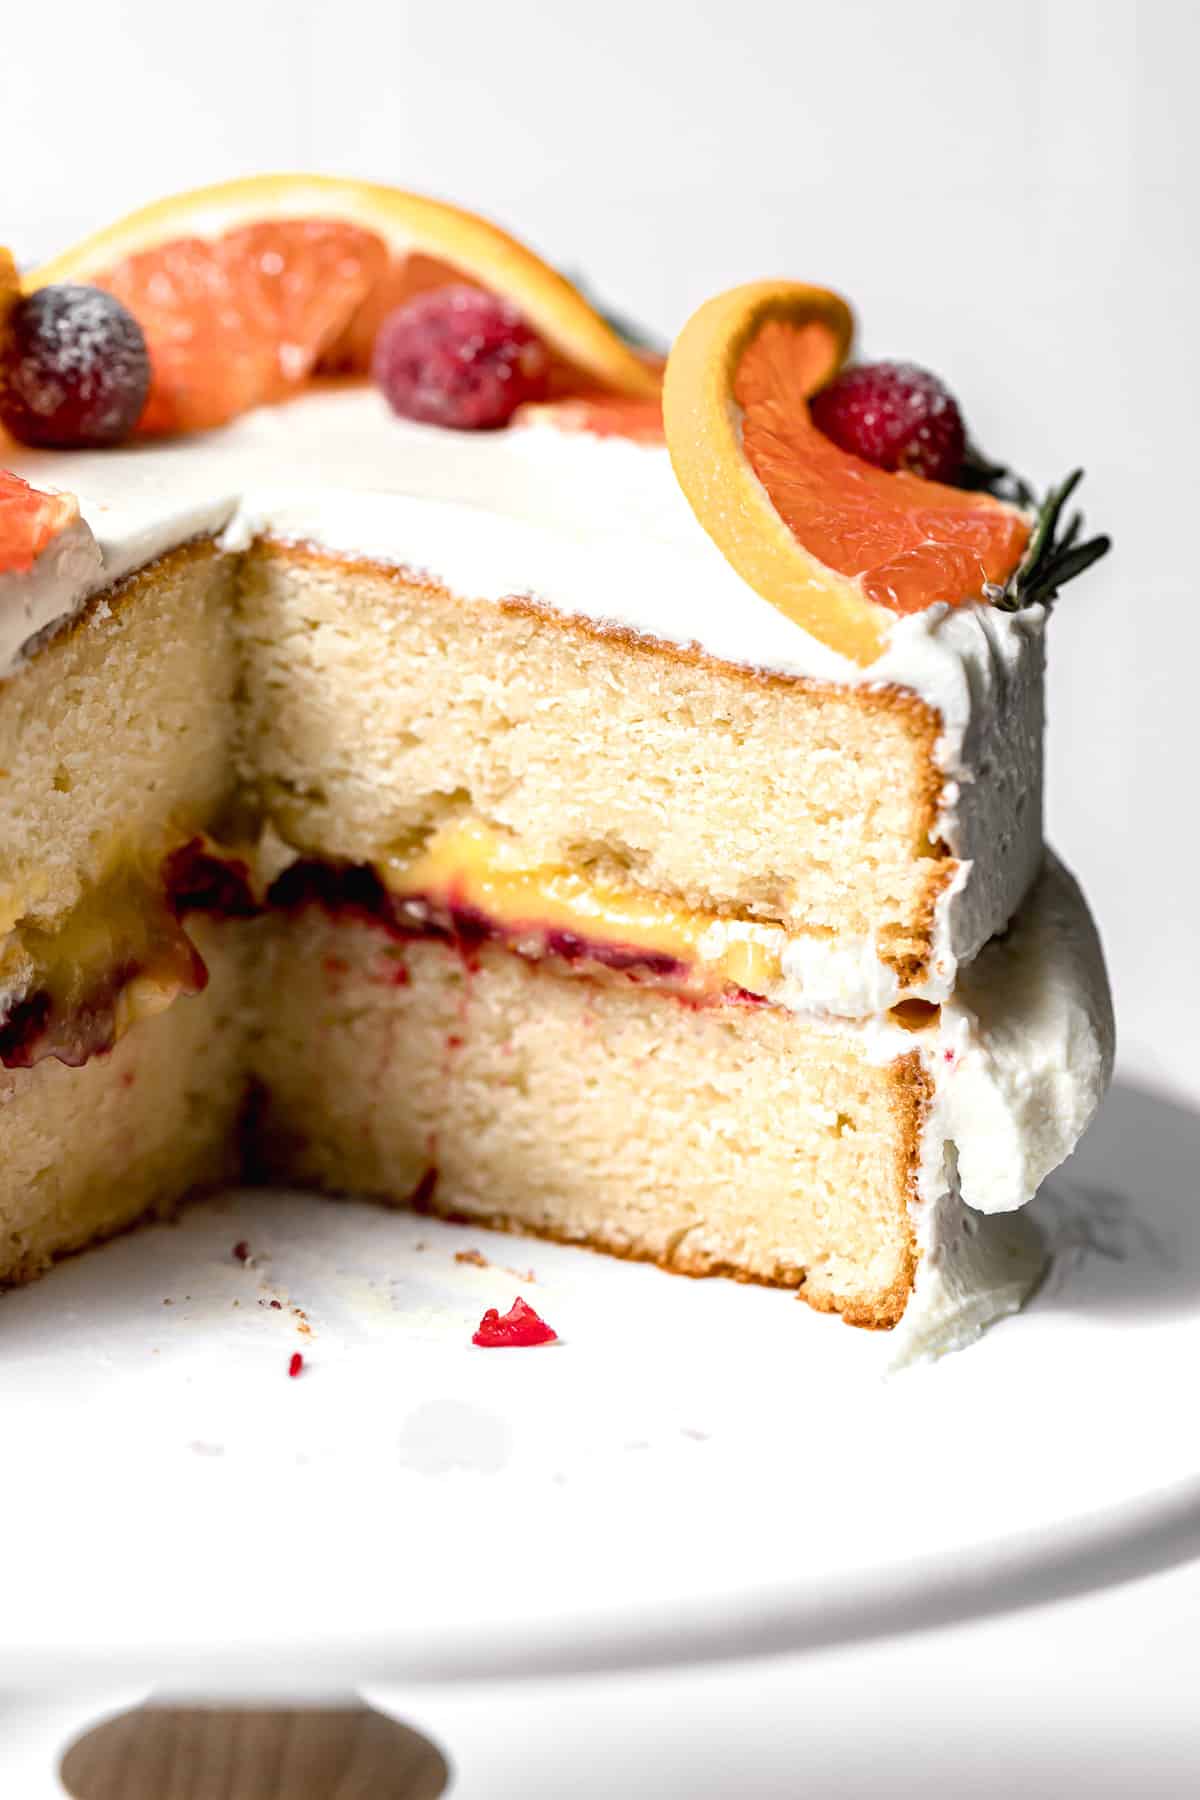 cranberry orange cake on cake stand cut to reveal inside texture